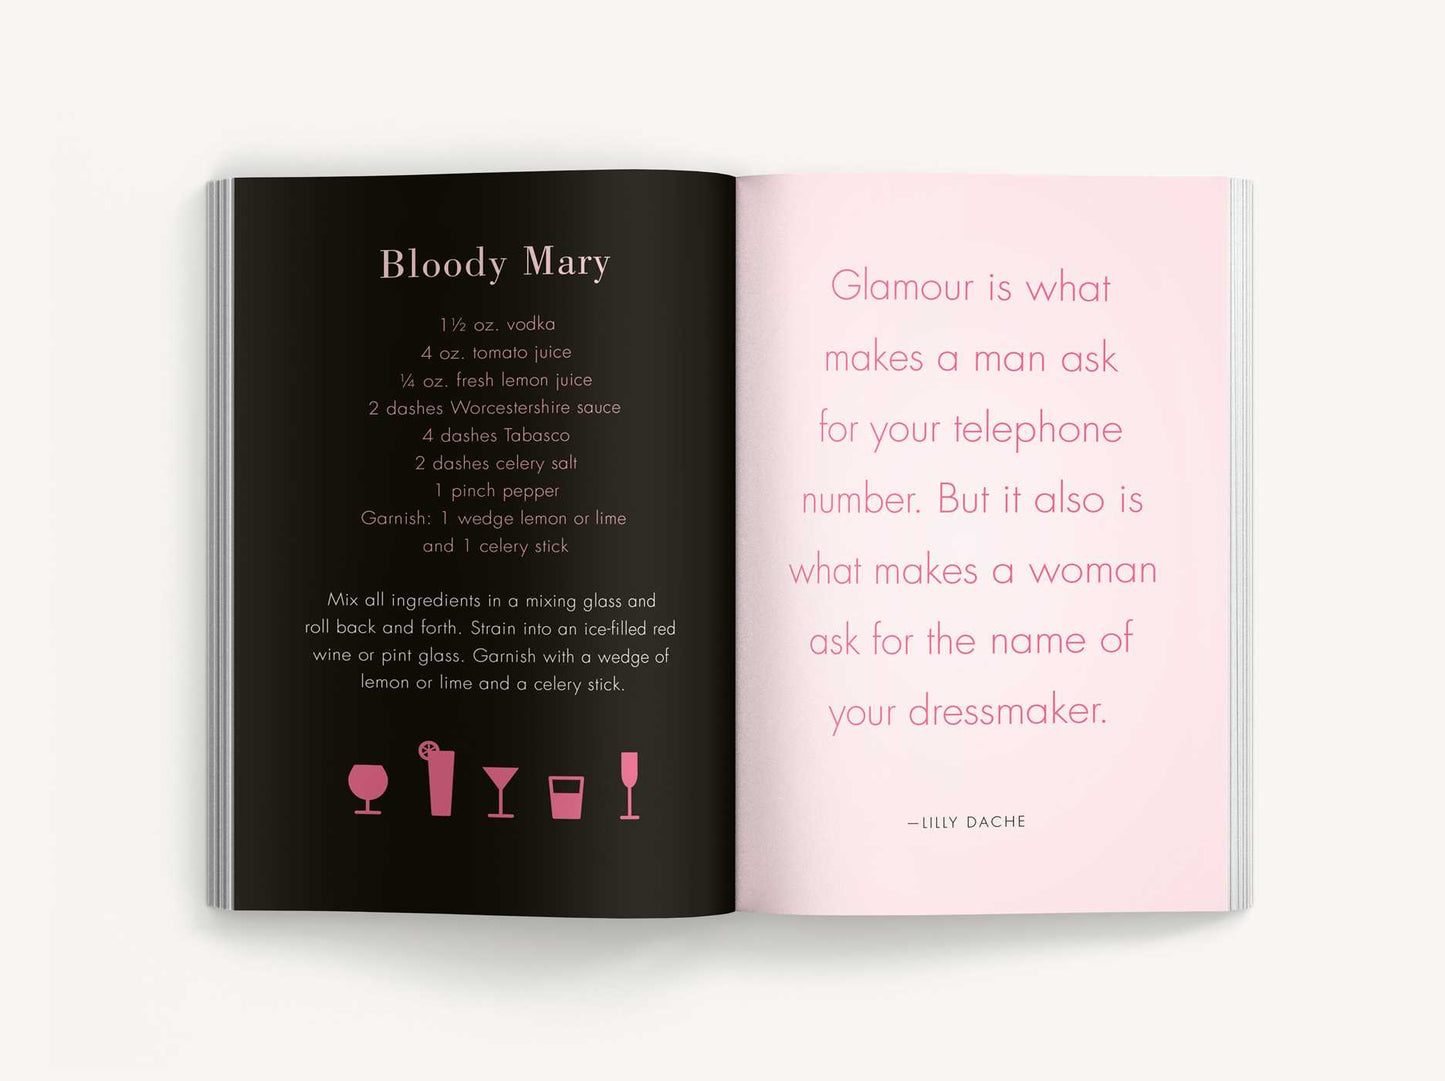 The Little Pink Book of Cocktails: The Perfect Ladies' Drinking Companion